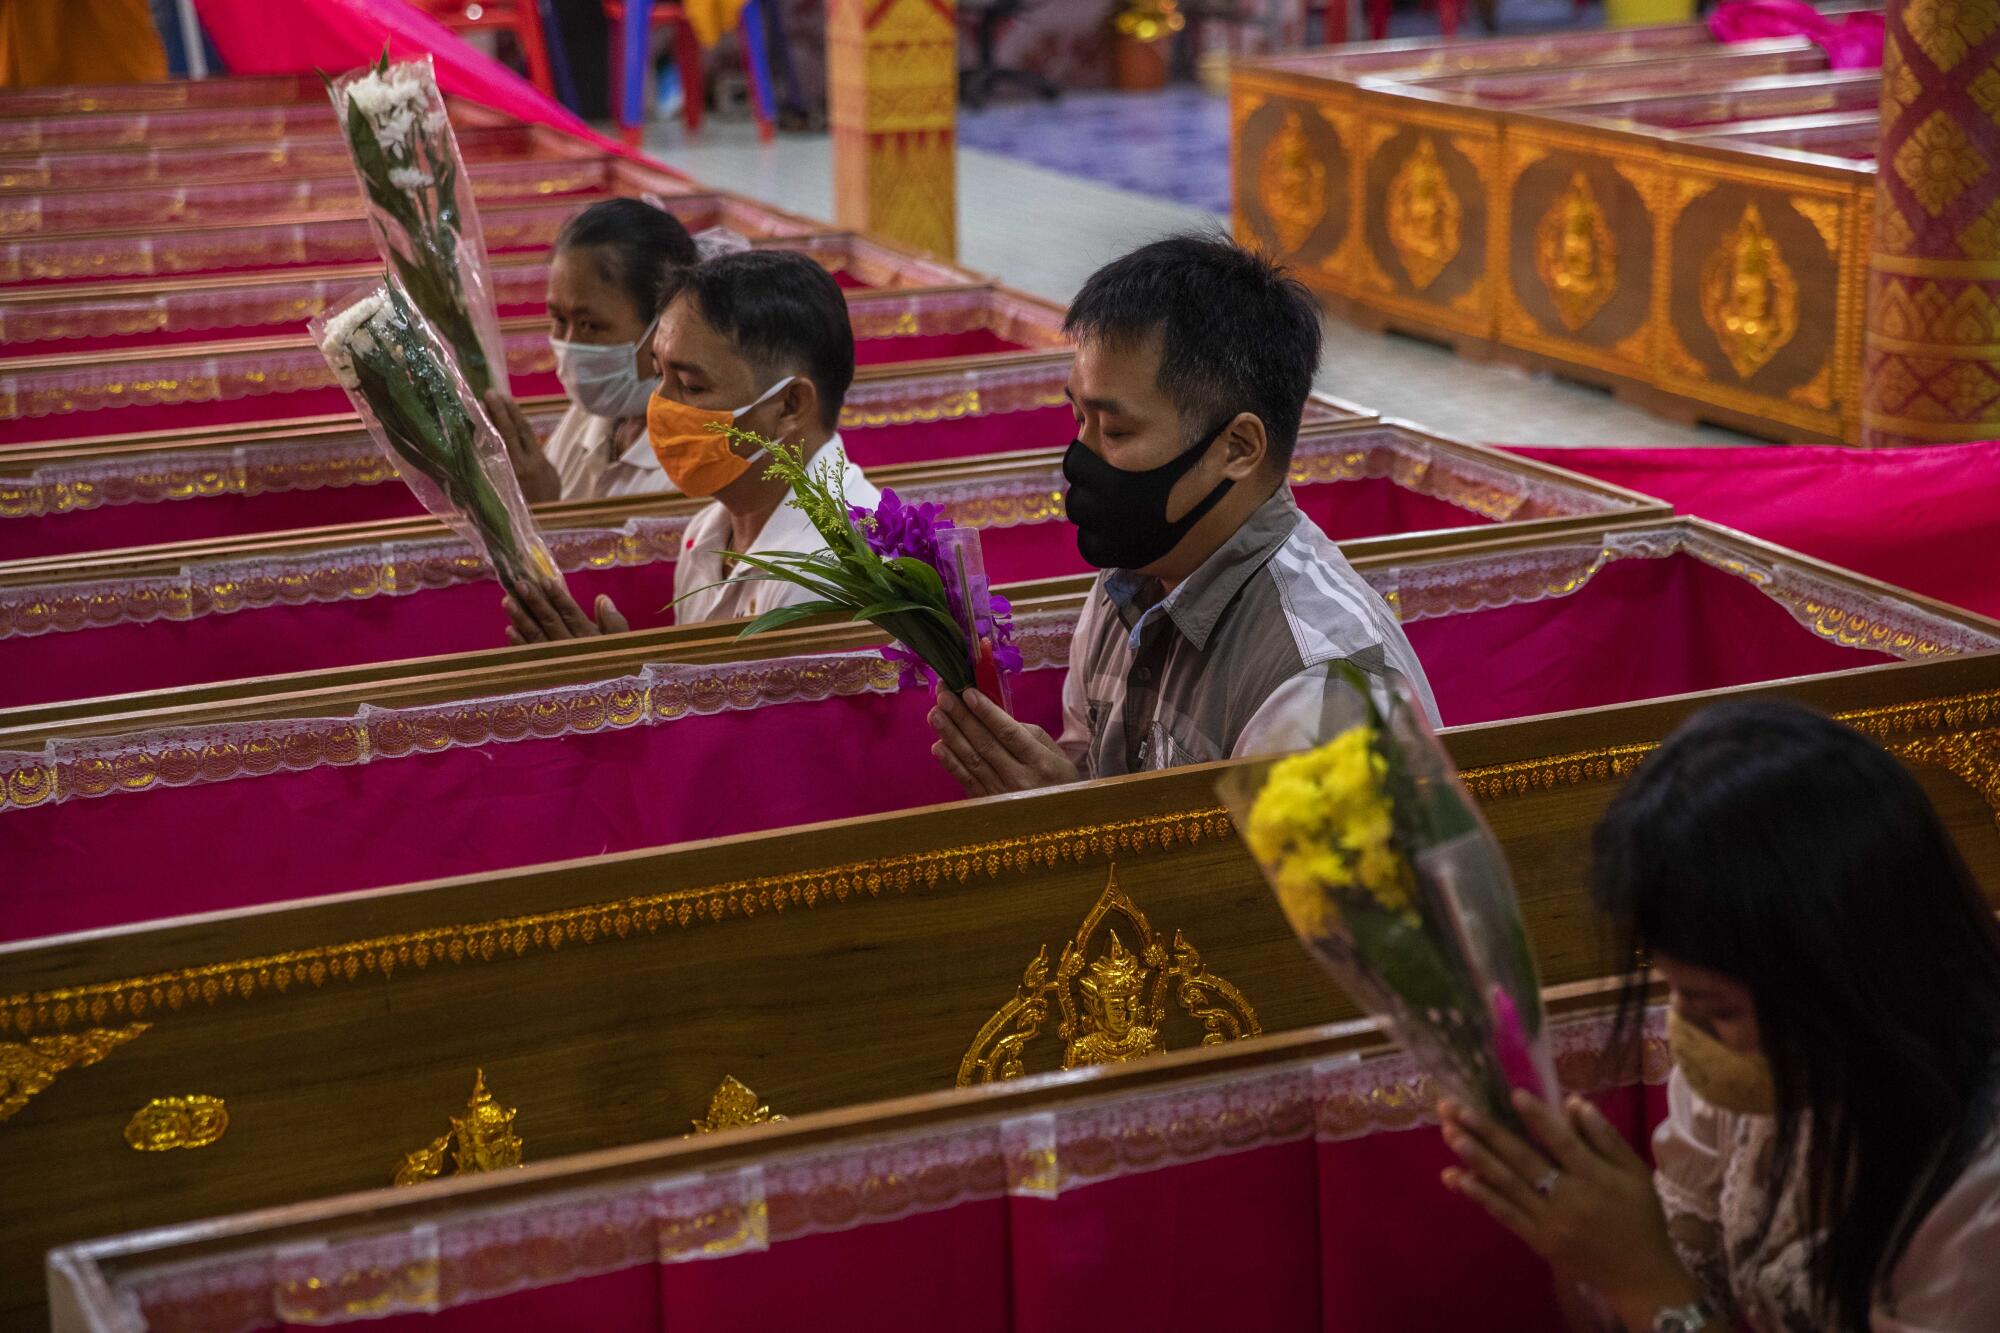 People in masks sit inside coffins, holding bouquets of flowers and praying.